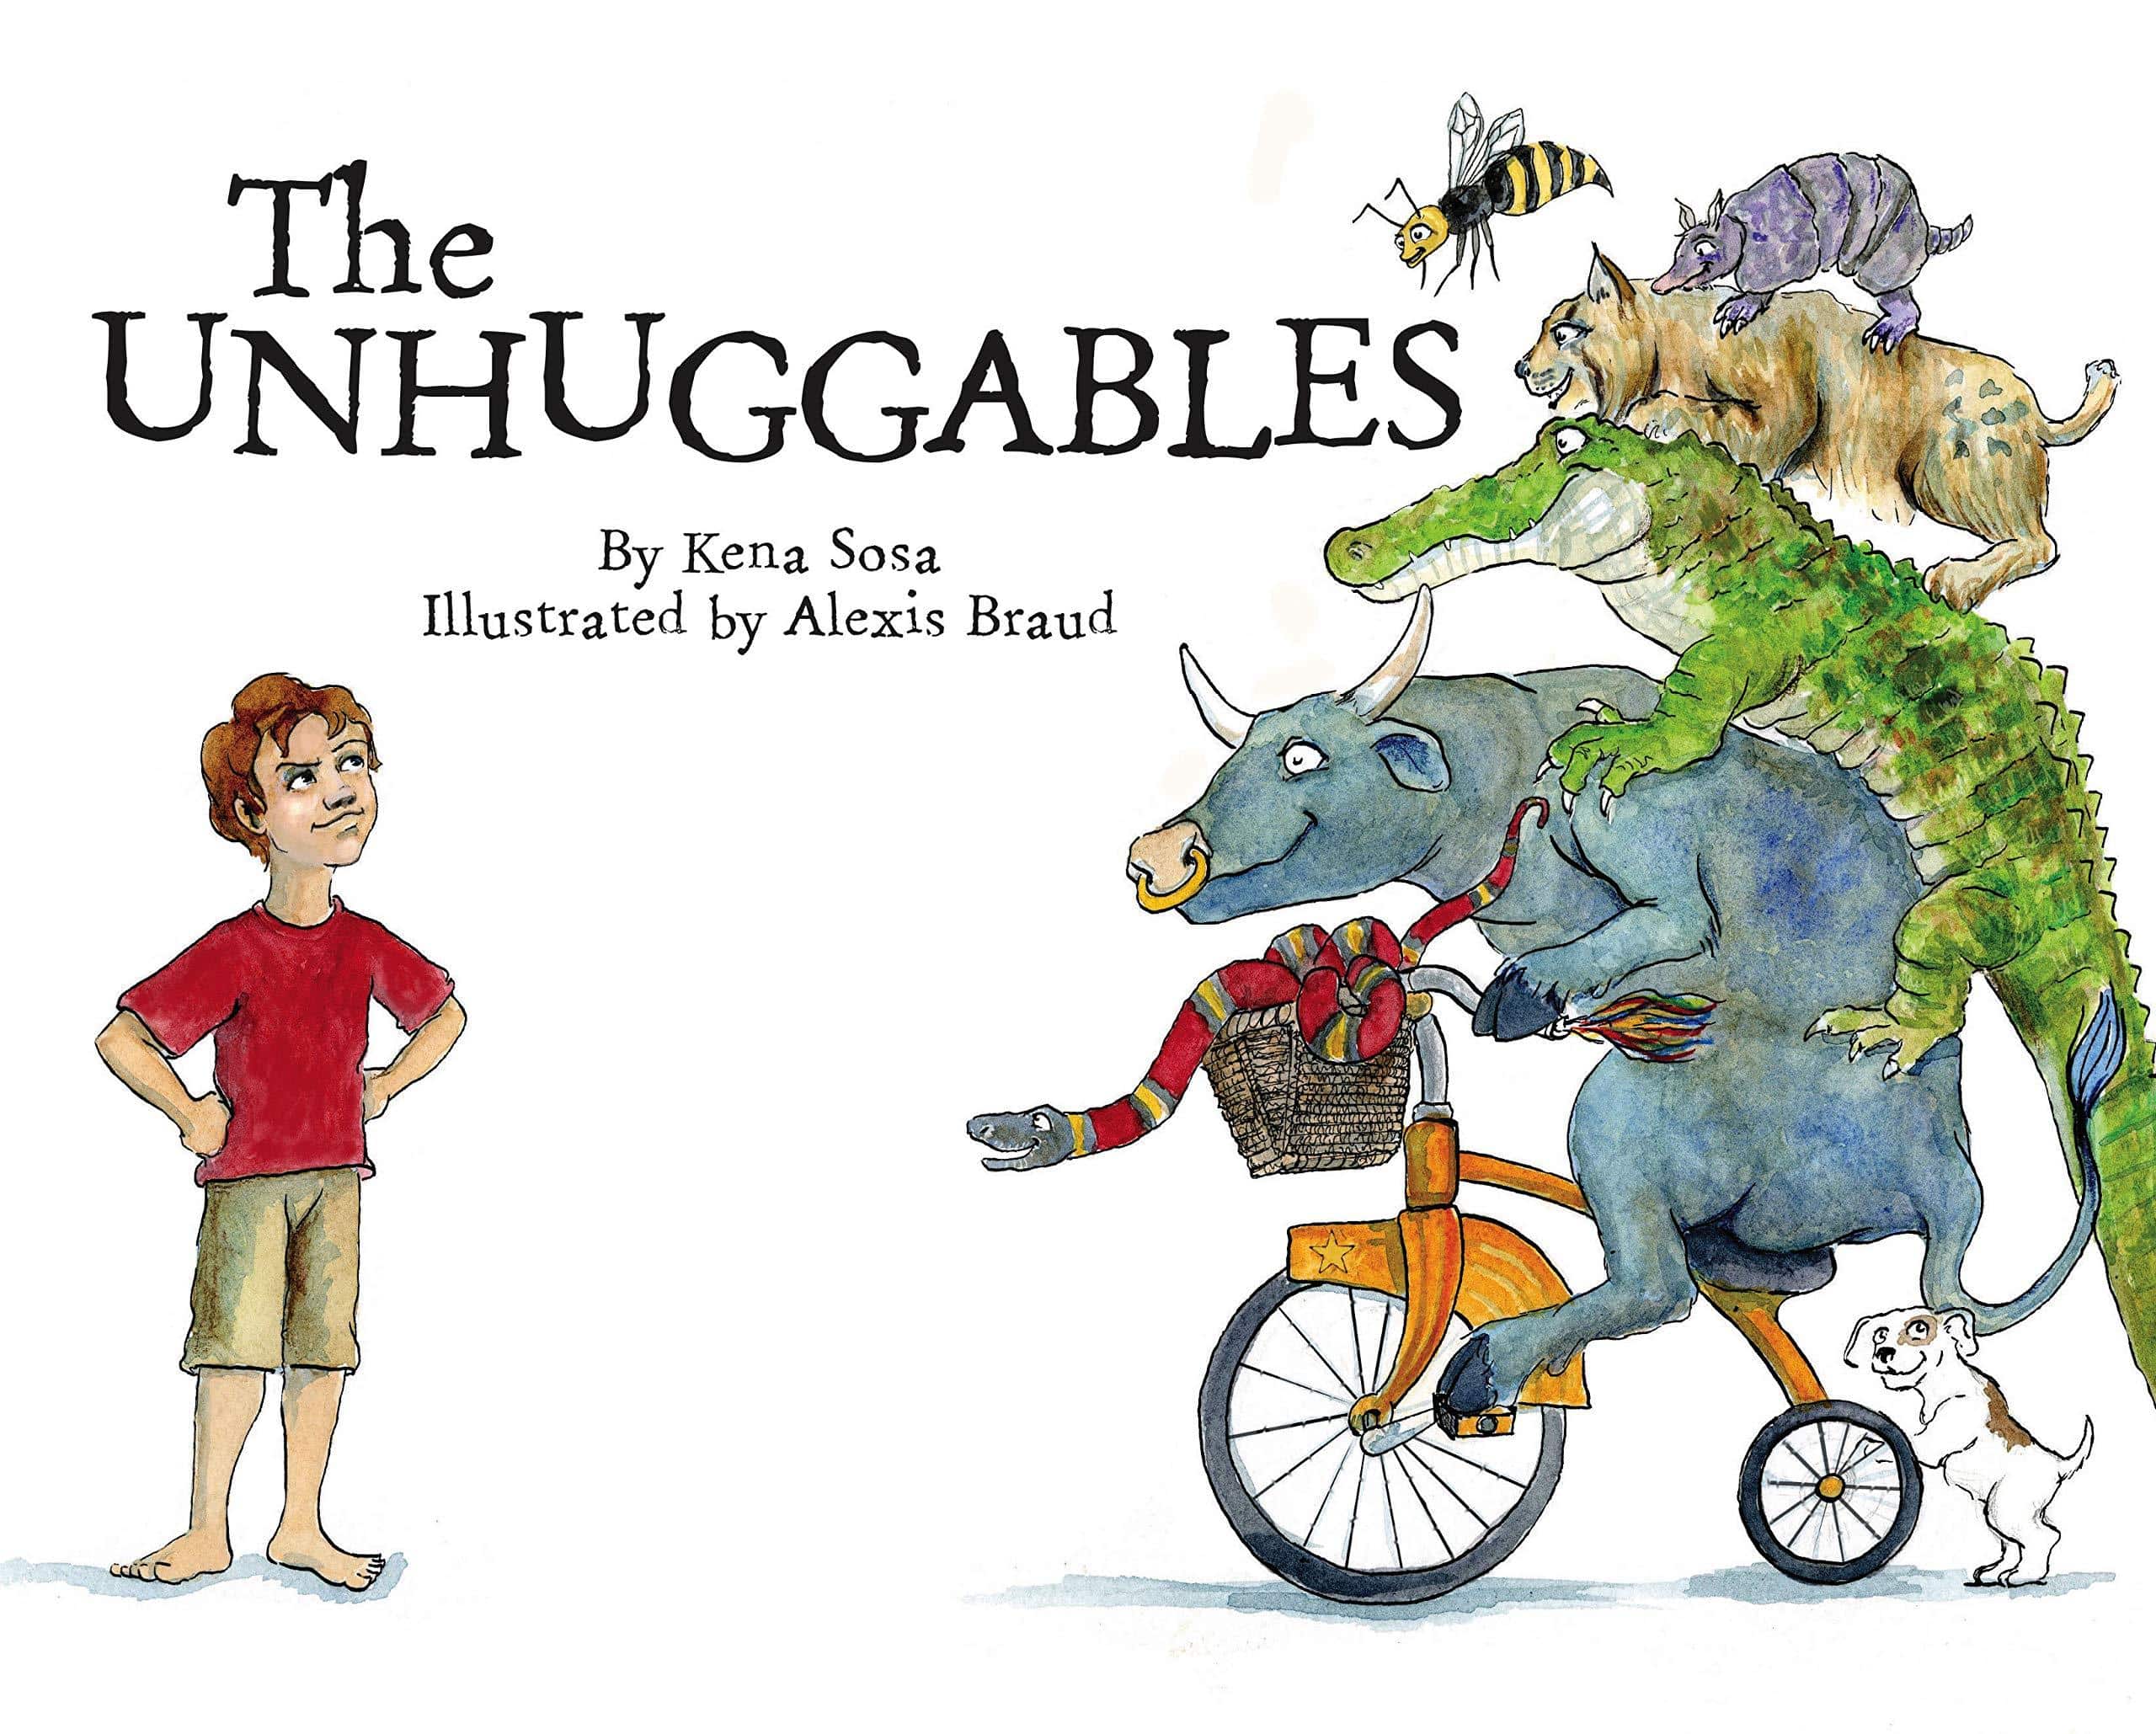 Arcadia Publishing - The Unhuggables by Kena Sosa - Little Miss Muffin Children & Home